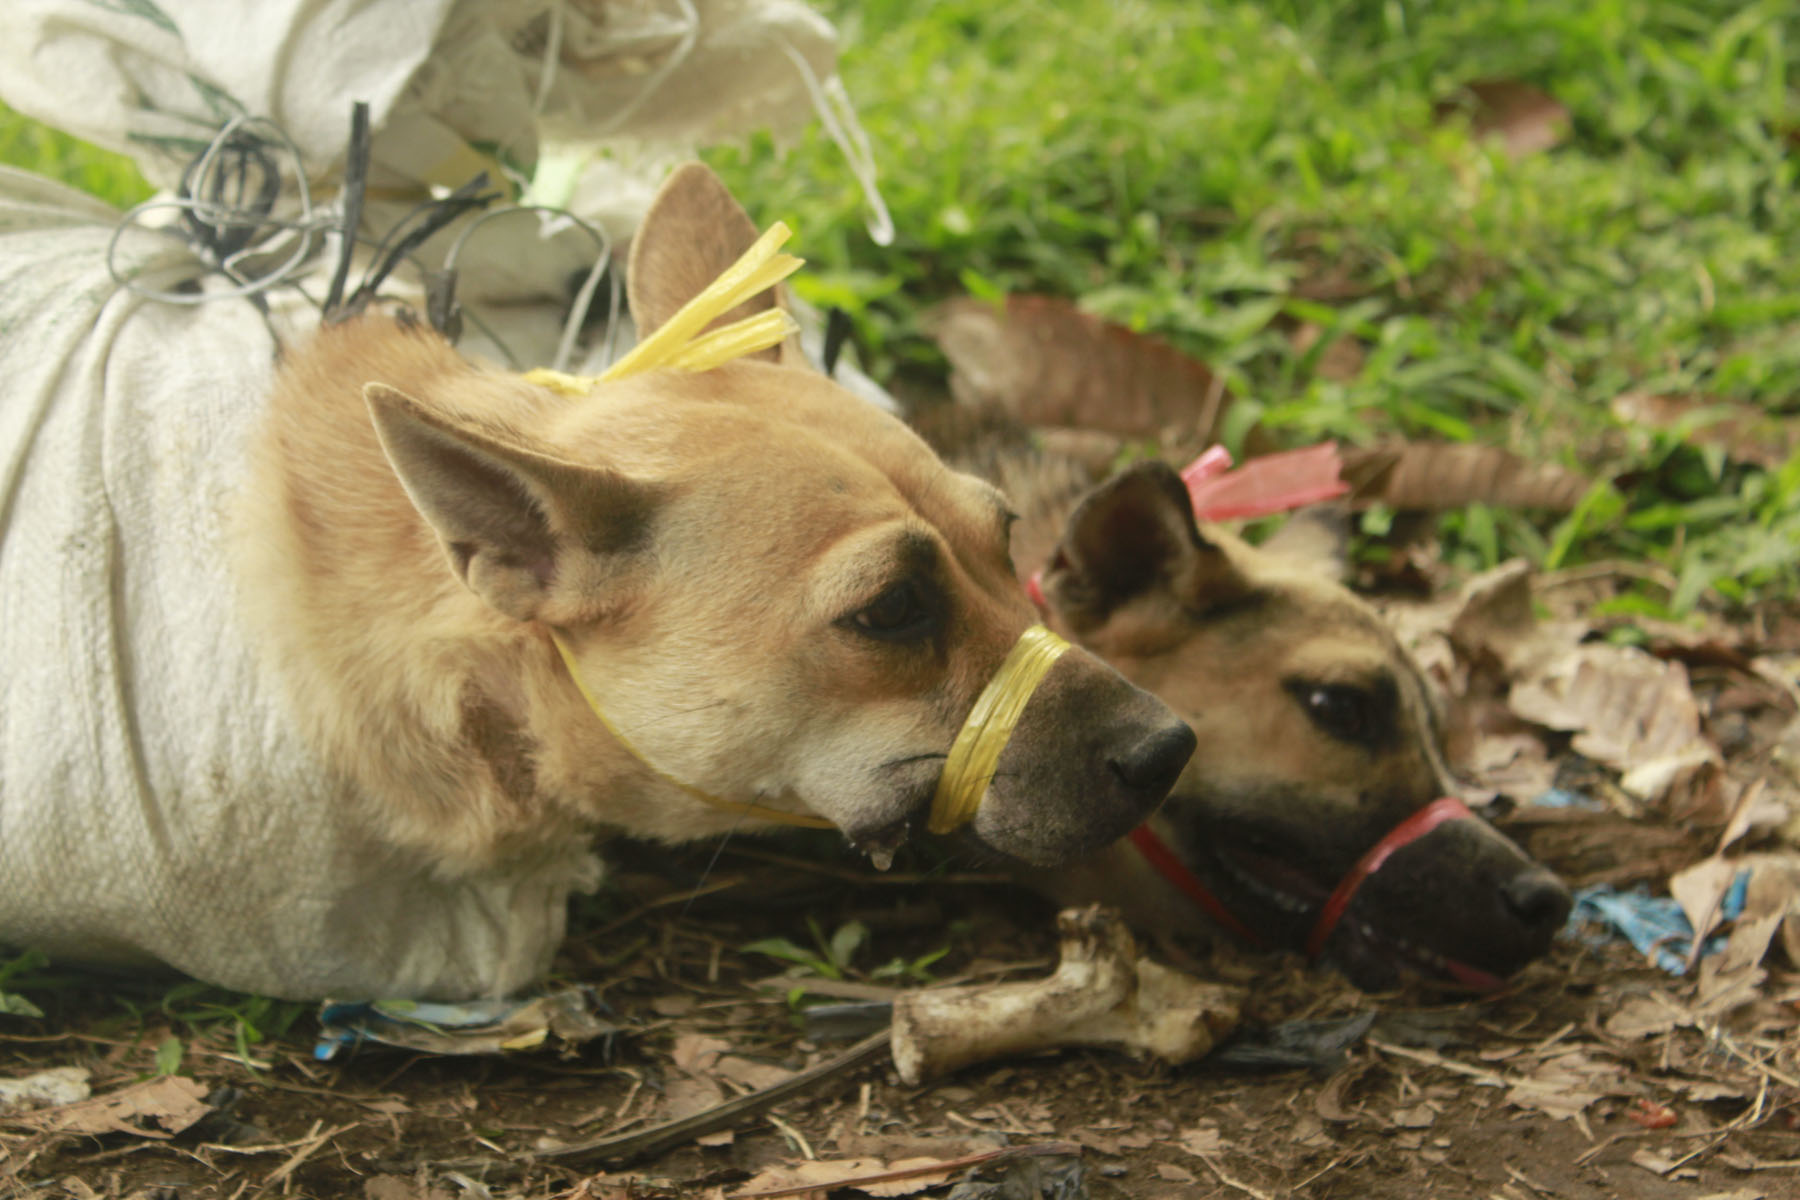 Impactful Actions to End the Dog Meat Trade Are Finally Being Taken in Indonesia